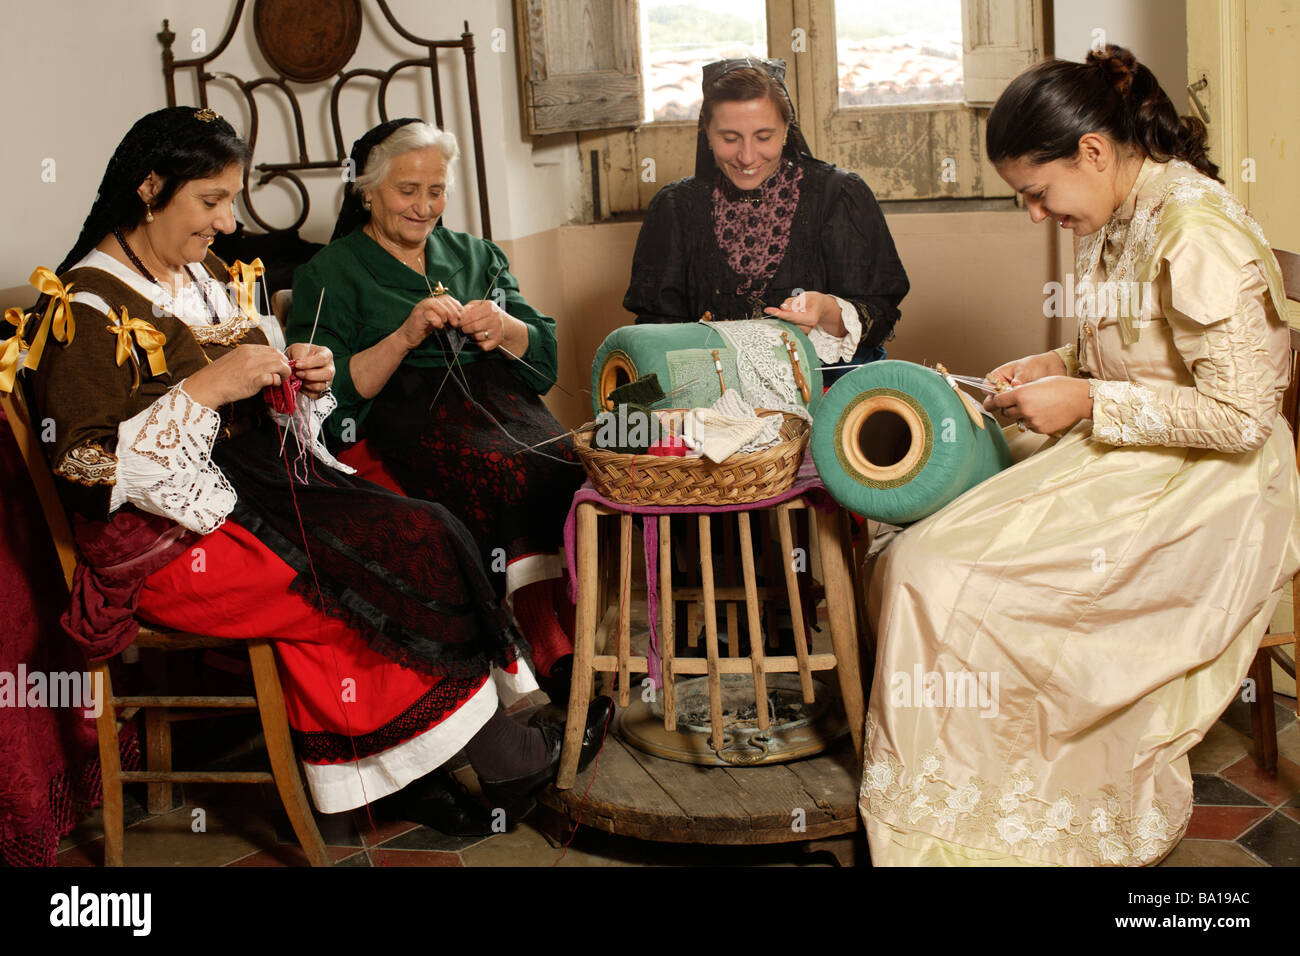 women in traditional crafts Stock Photo